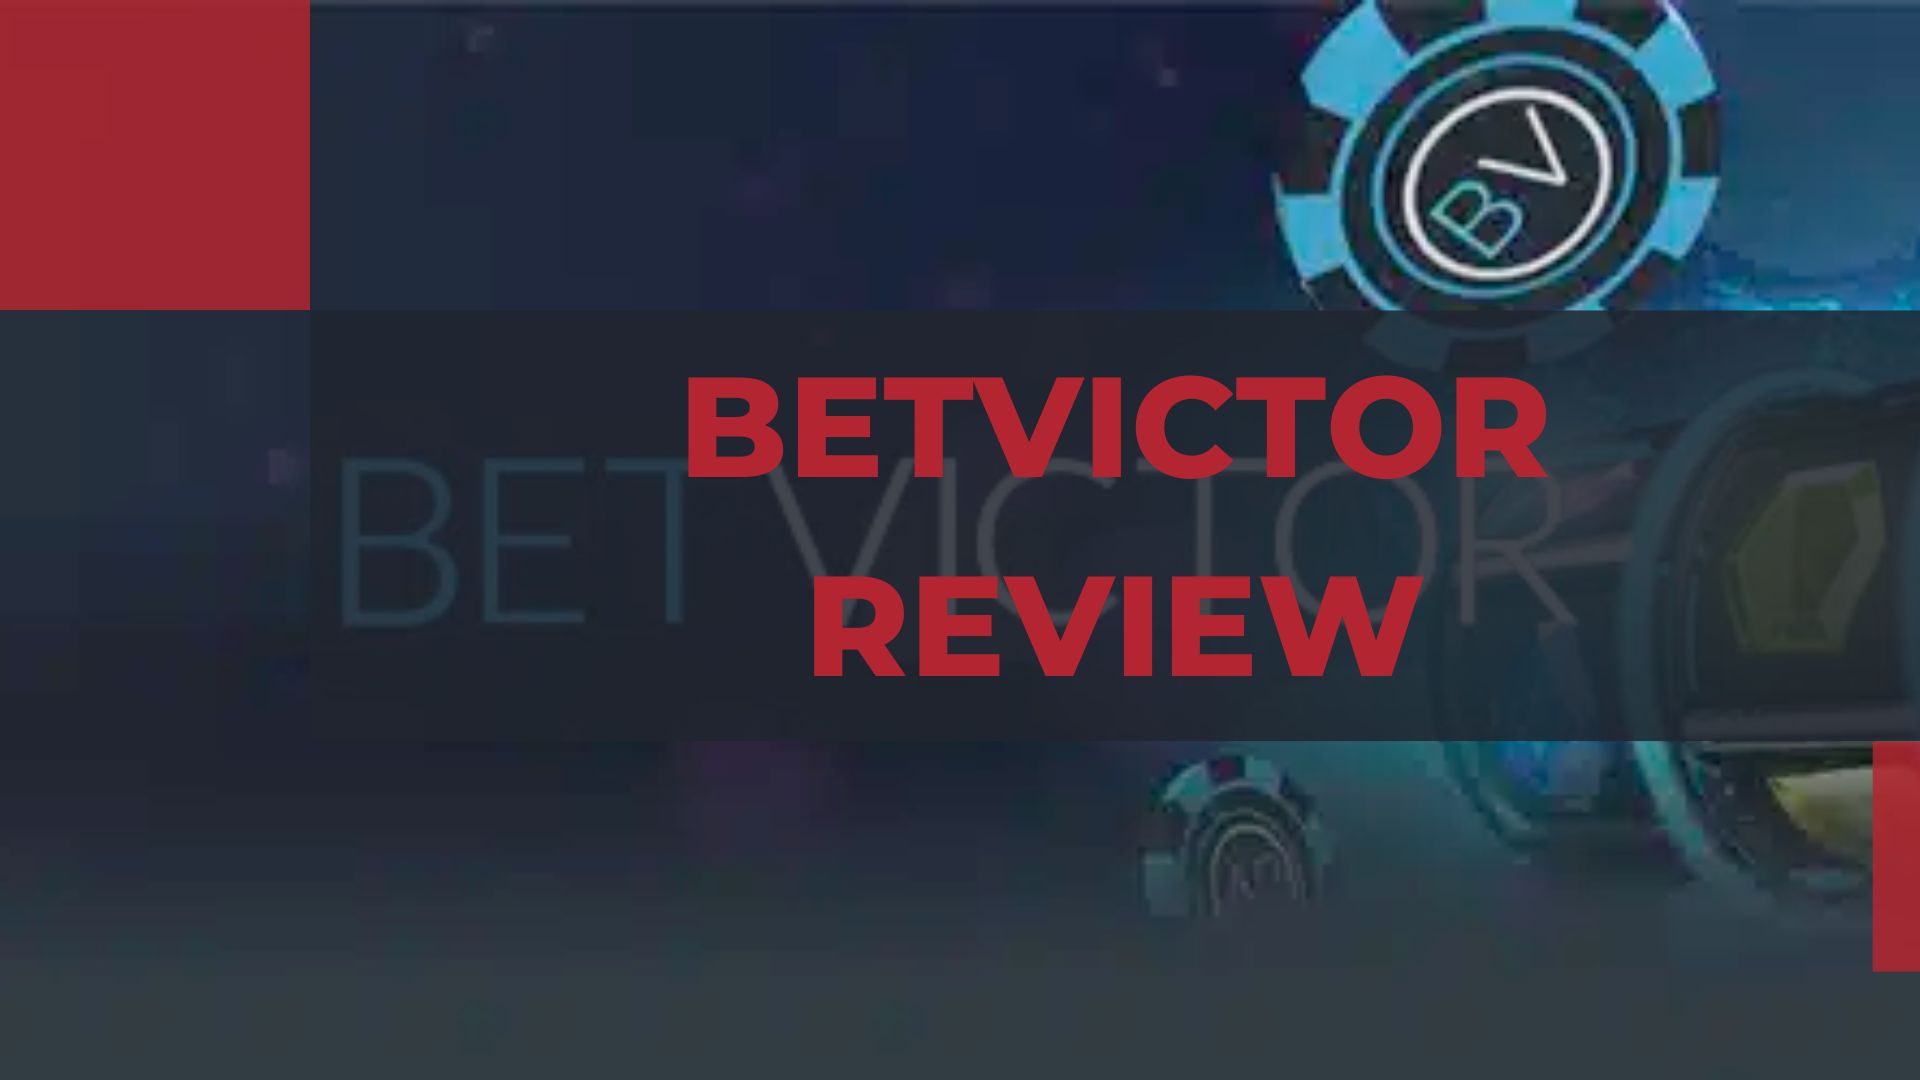 BetVictor bookmaker review – what are the differences from competitors?